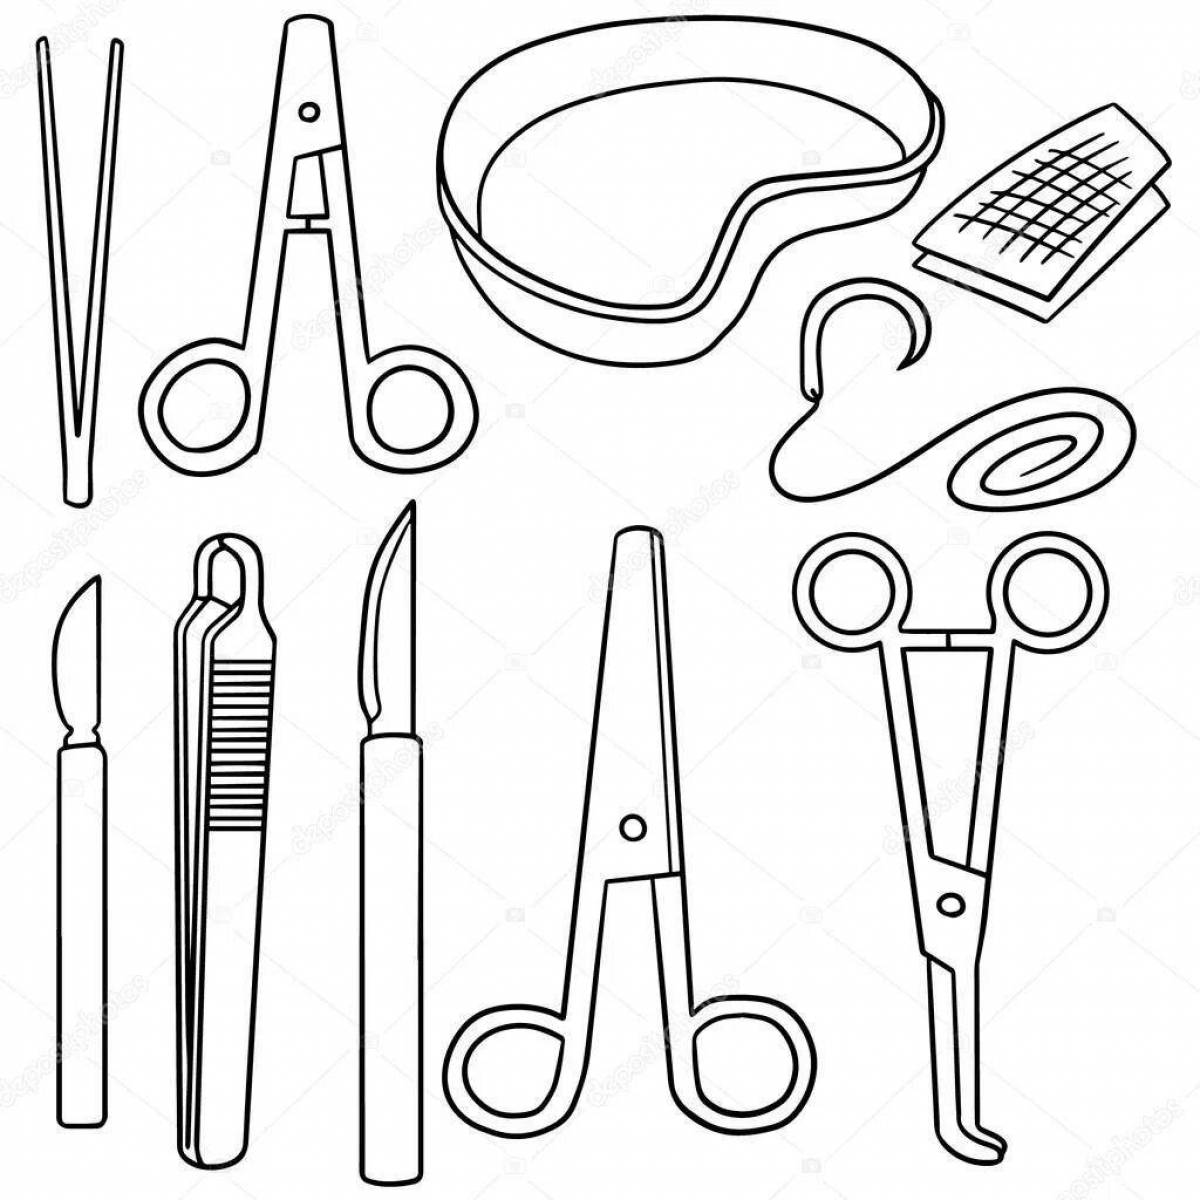 Merry coloring of medical instruments